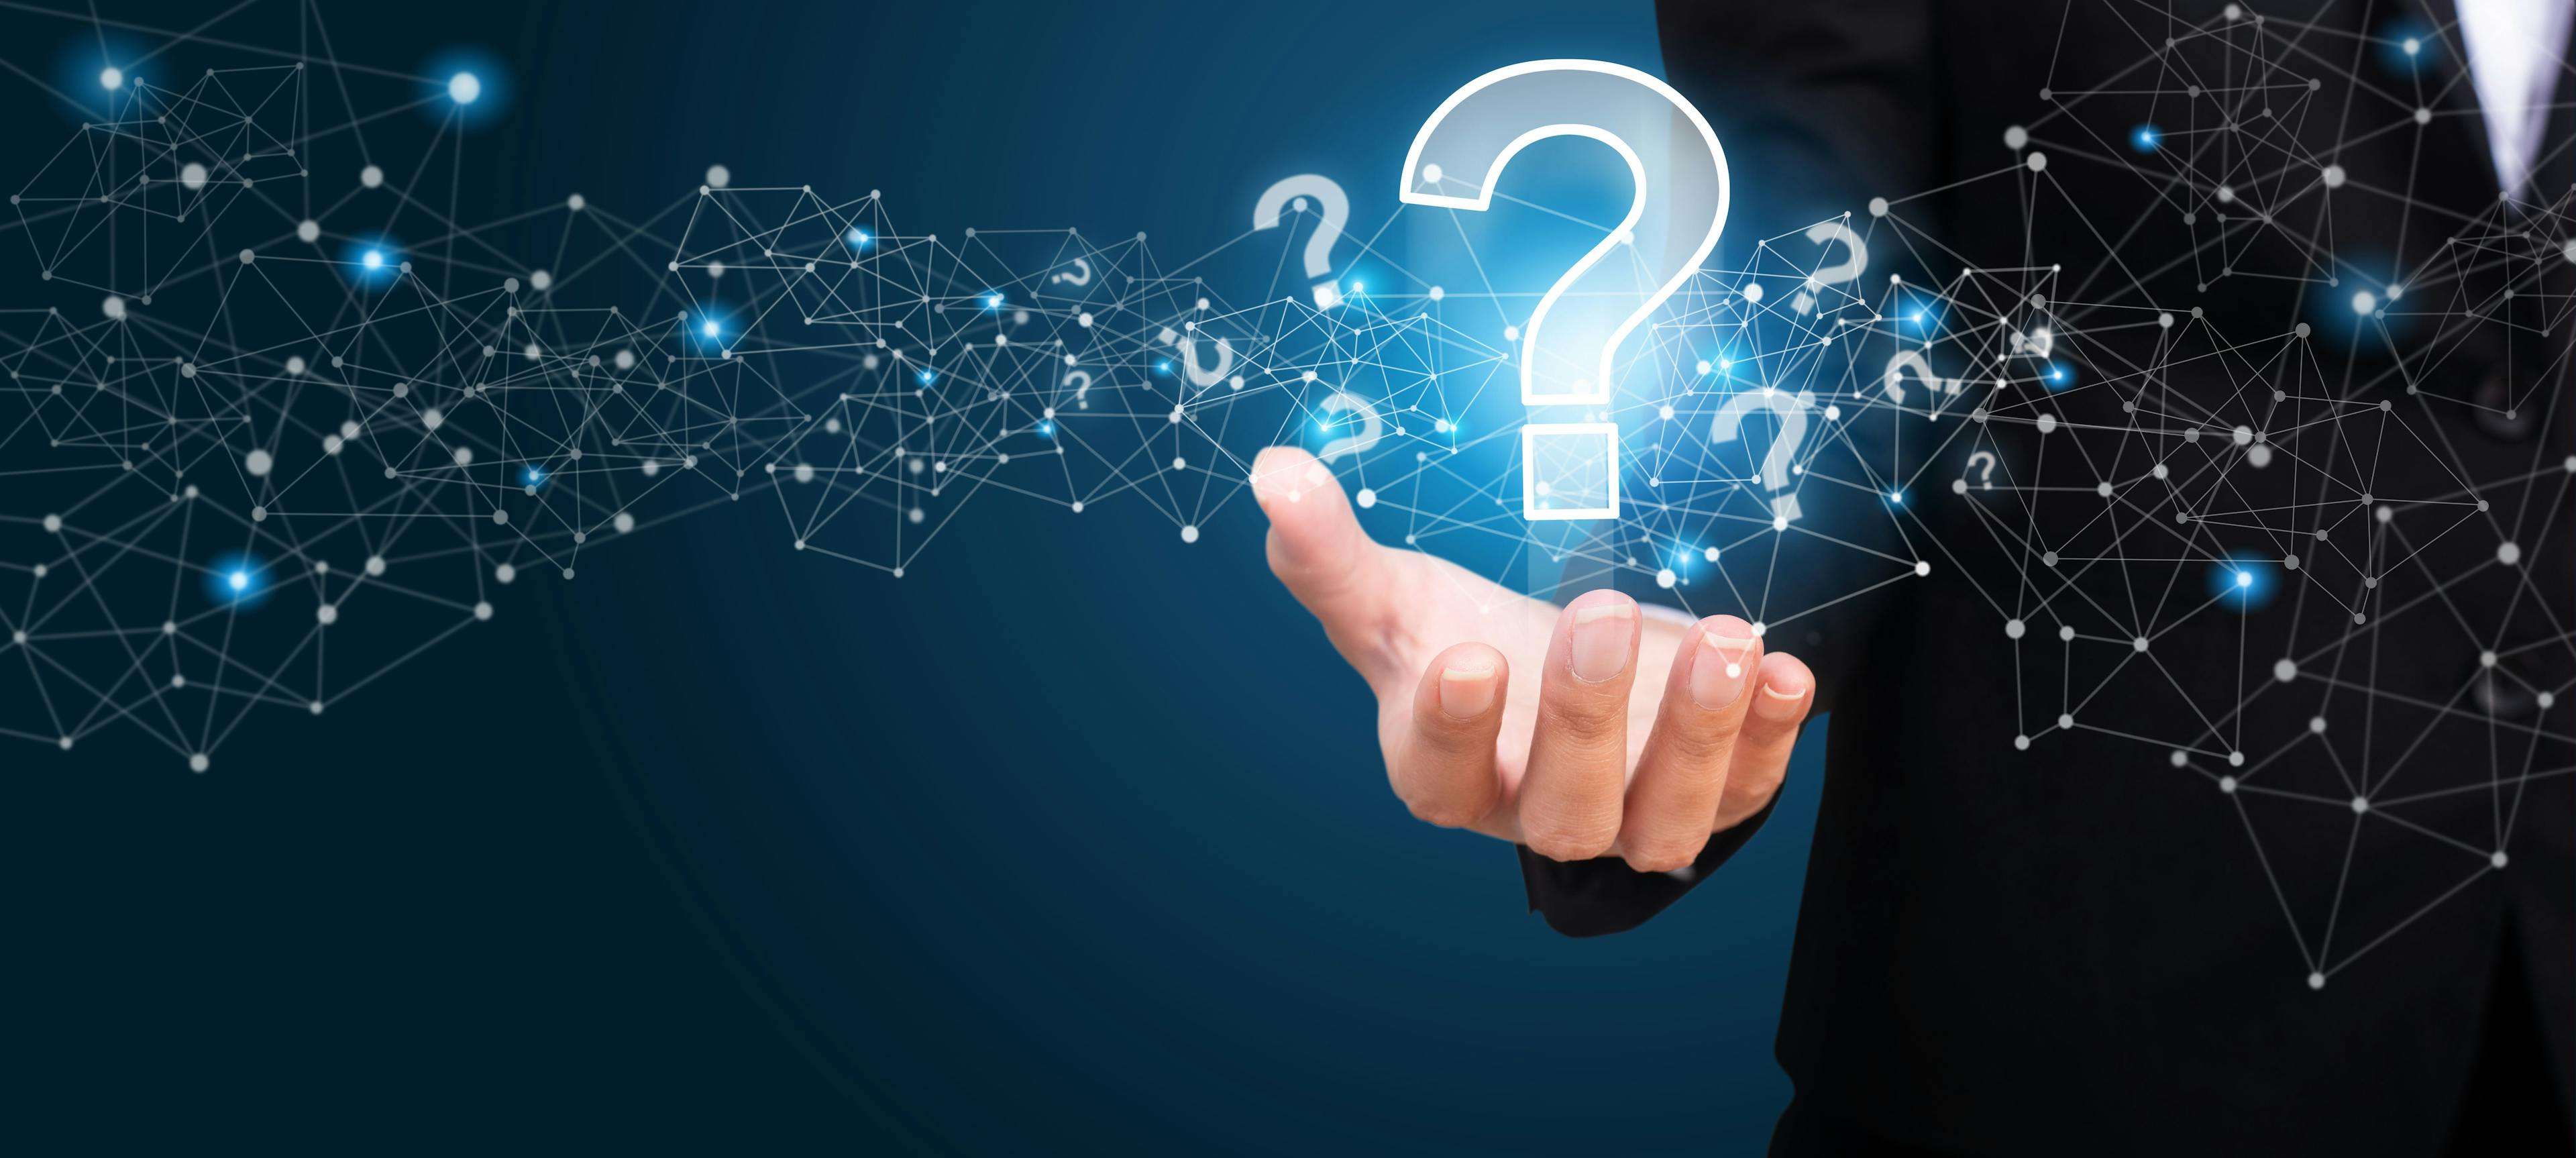 Ask your IT provider these key questions